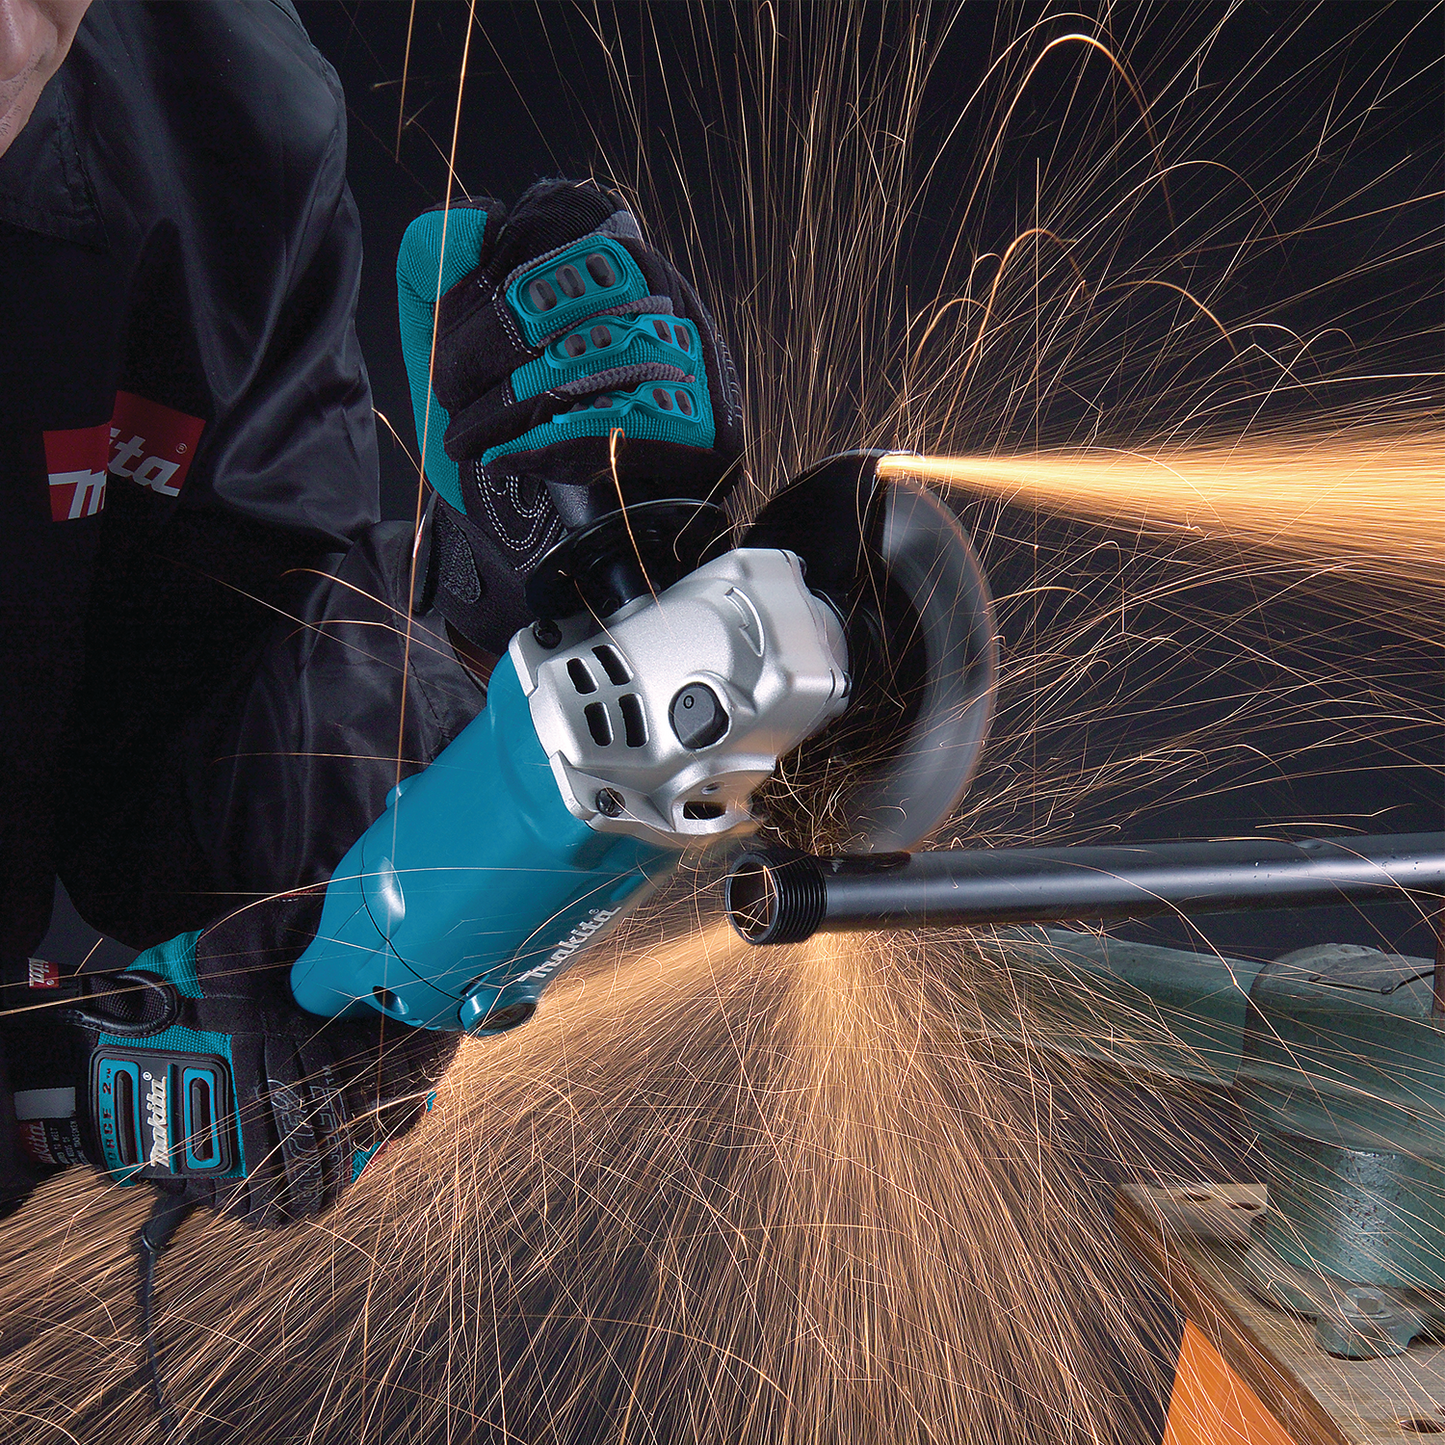 Makita 5 Inch Angle Grinder  Factory Serviced